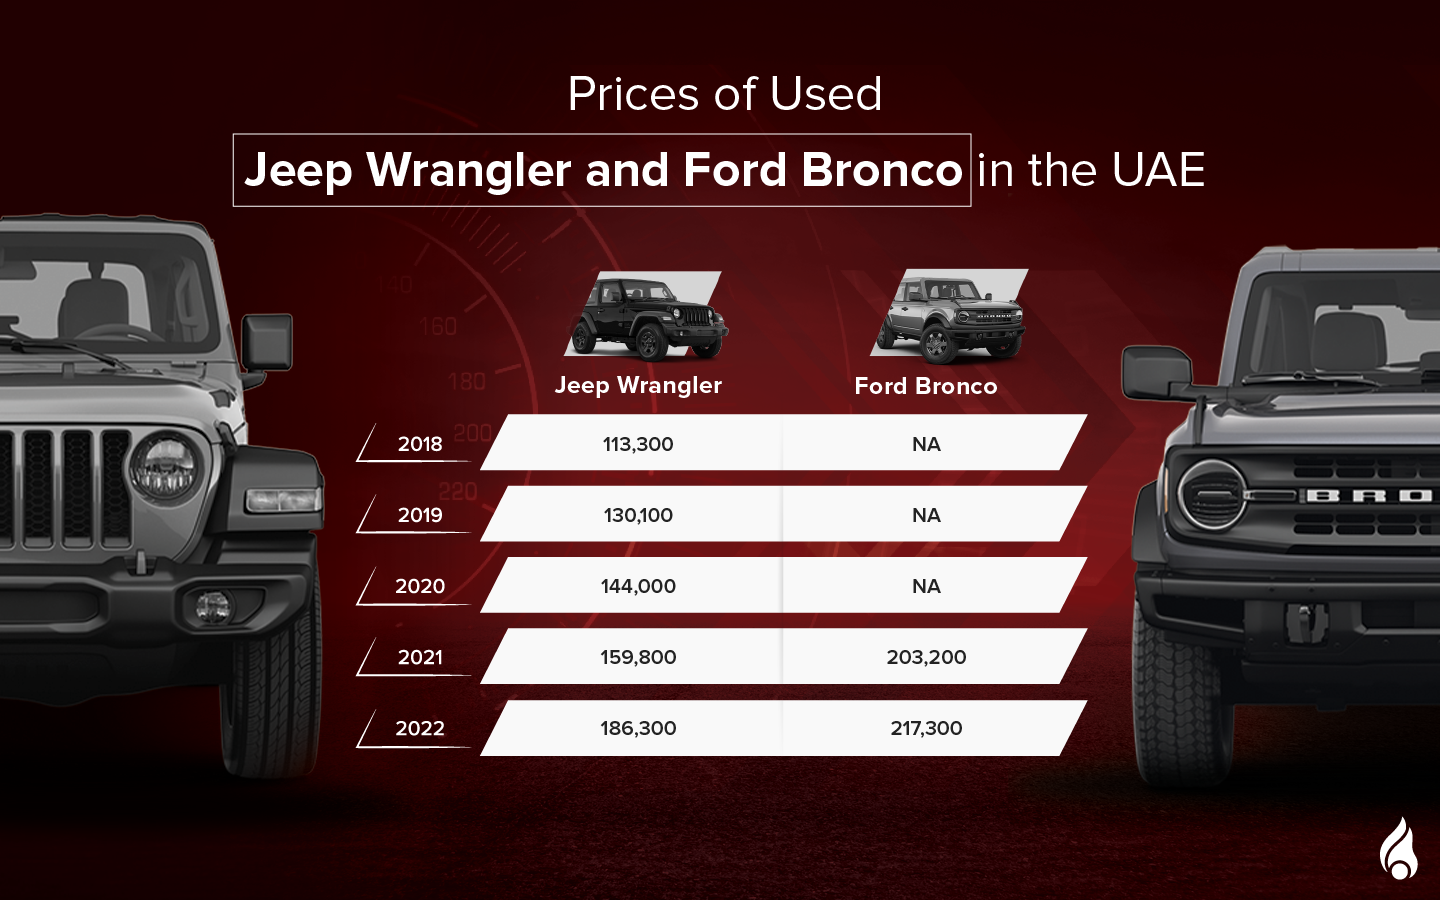 average prices of used Jeep Wrangler and Ford Bronco 